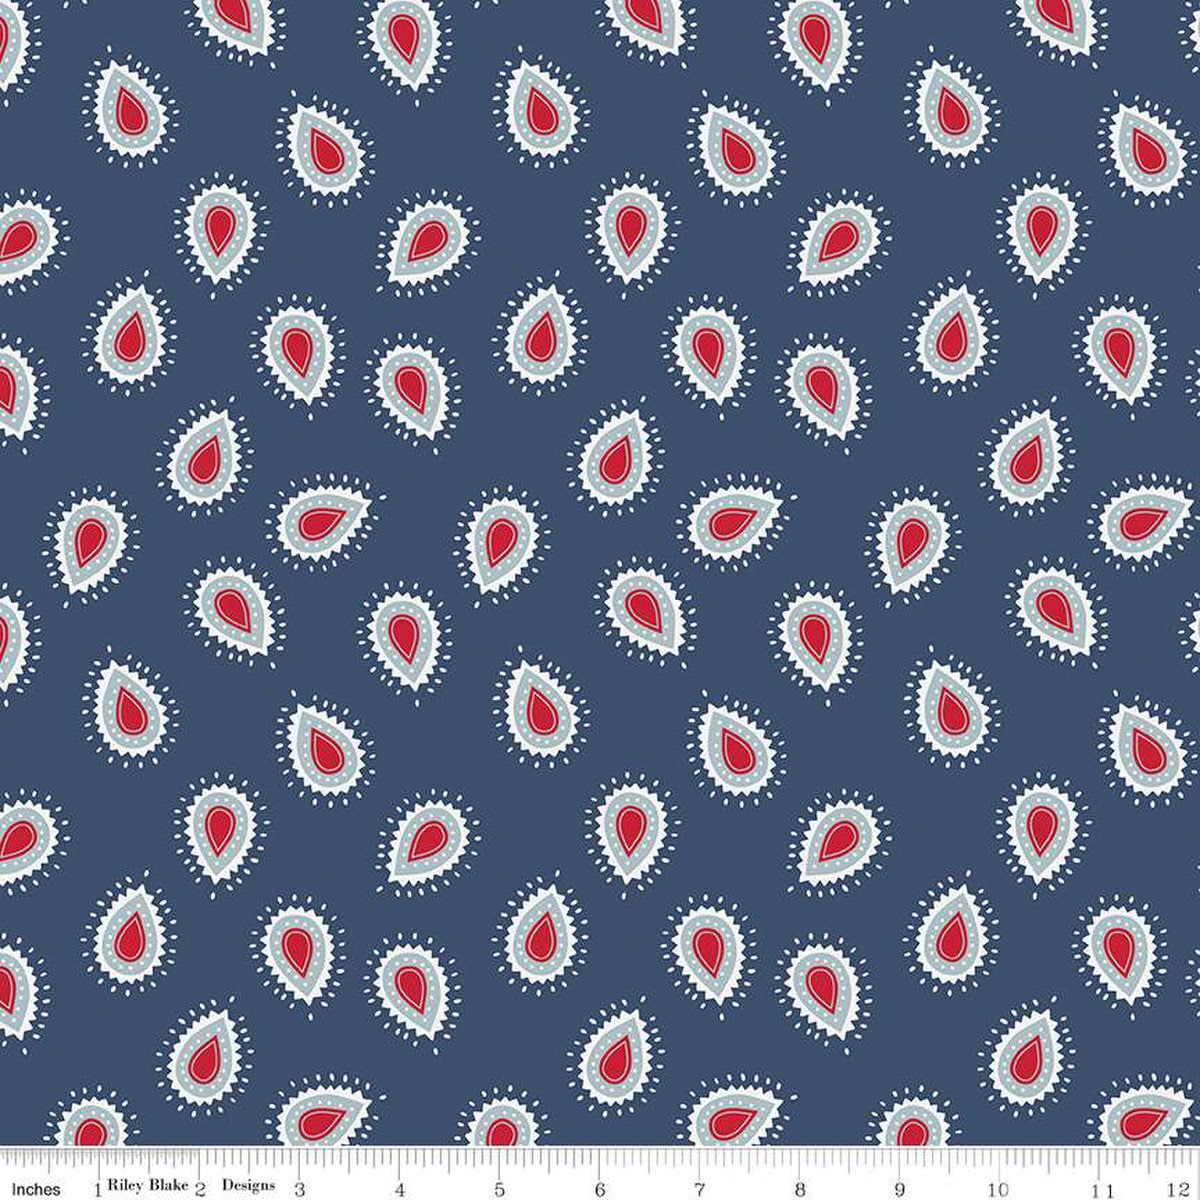 American Beauty Fabric Rolie Polie (Jelly Roll) - Riley Blake Designs RP-14440-40, Patriotic Floral Fabric Jelly Roll Strip Pack